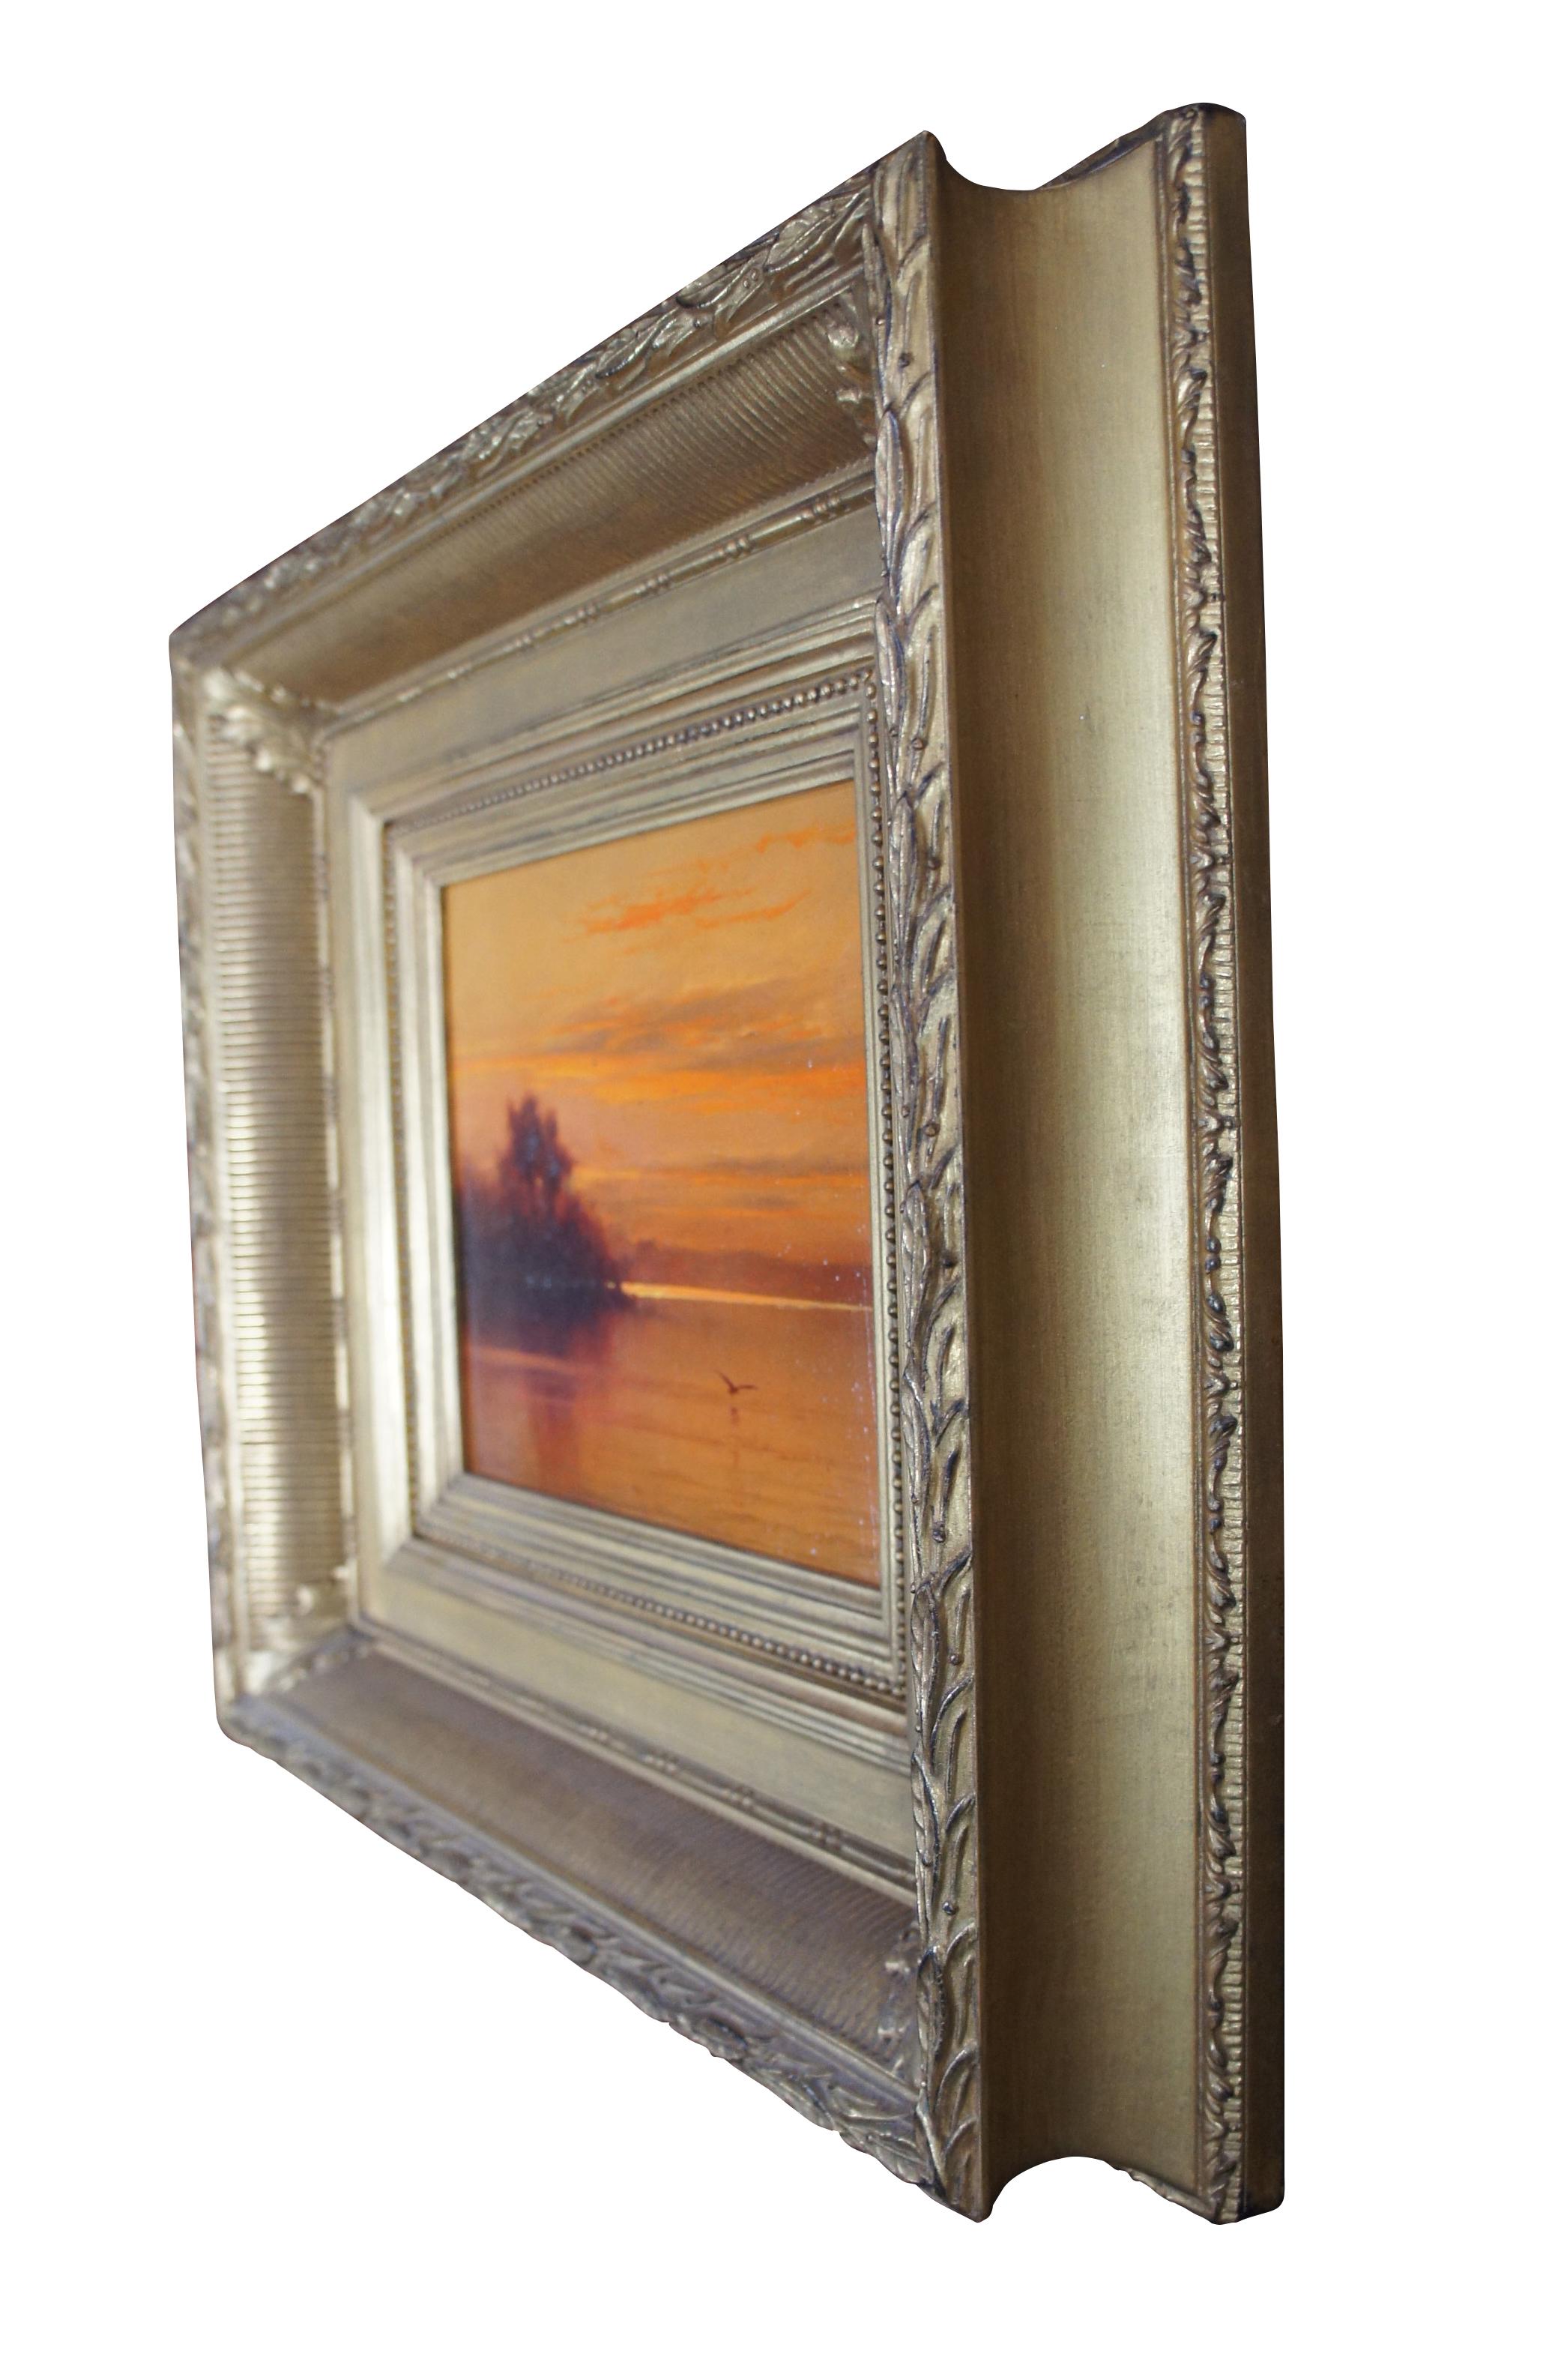 Vintage William R Davis oil painting on board featuring a landscape / seascape with a bird, trees and a view of the Indian River at sunset. Signed lower left and on verso. Purchased in 2007 at the Vero Beach Meghan Candler Gallery, 